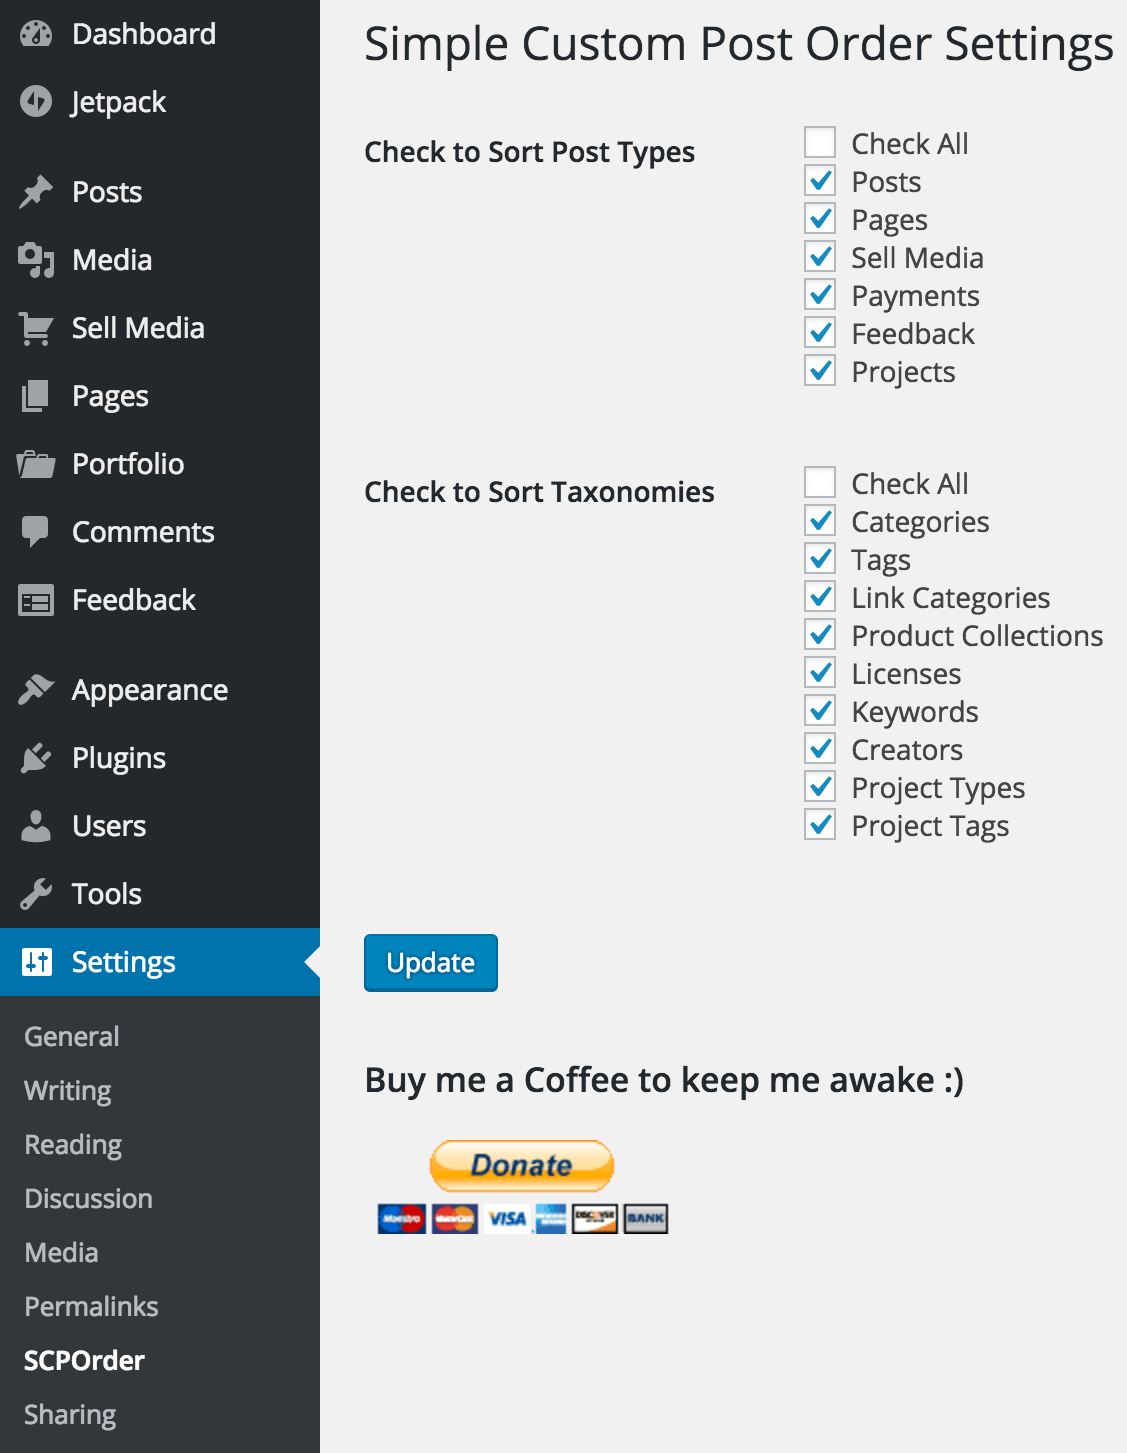 The Simple Custom Post Order settings page.